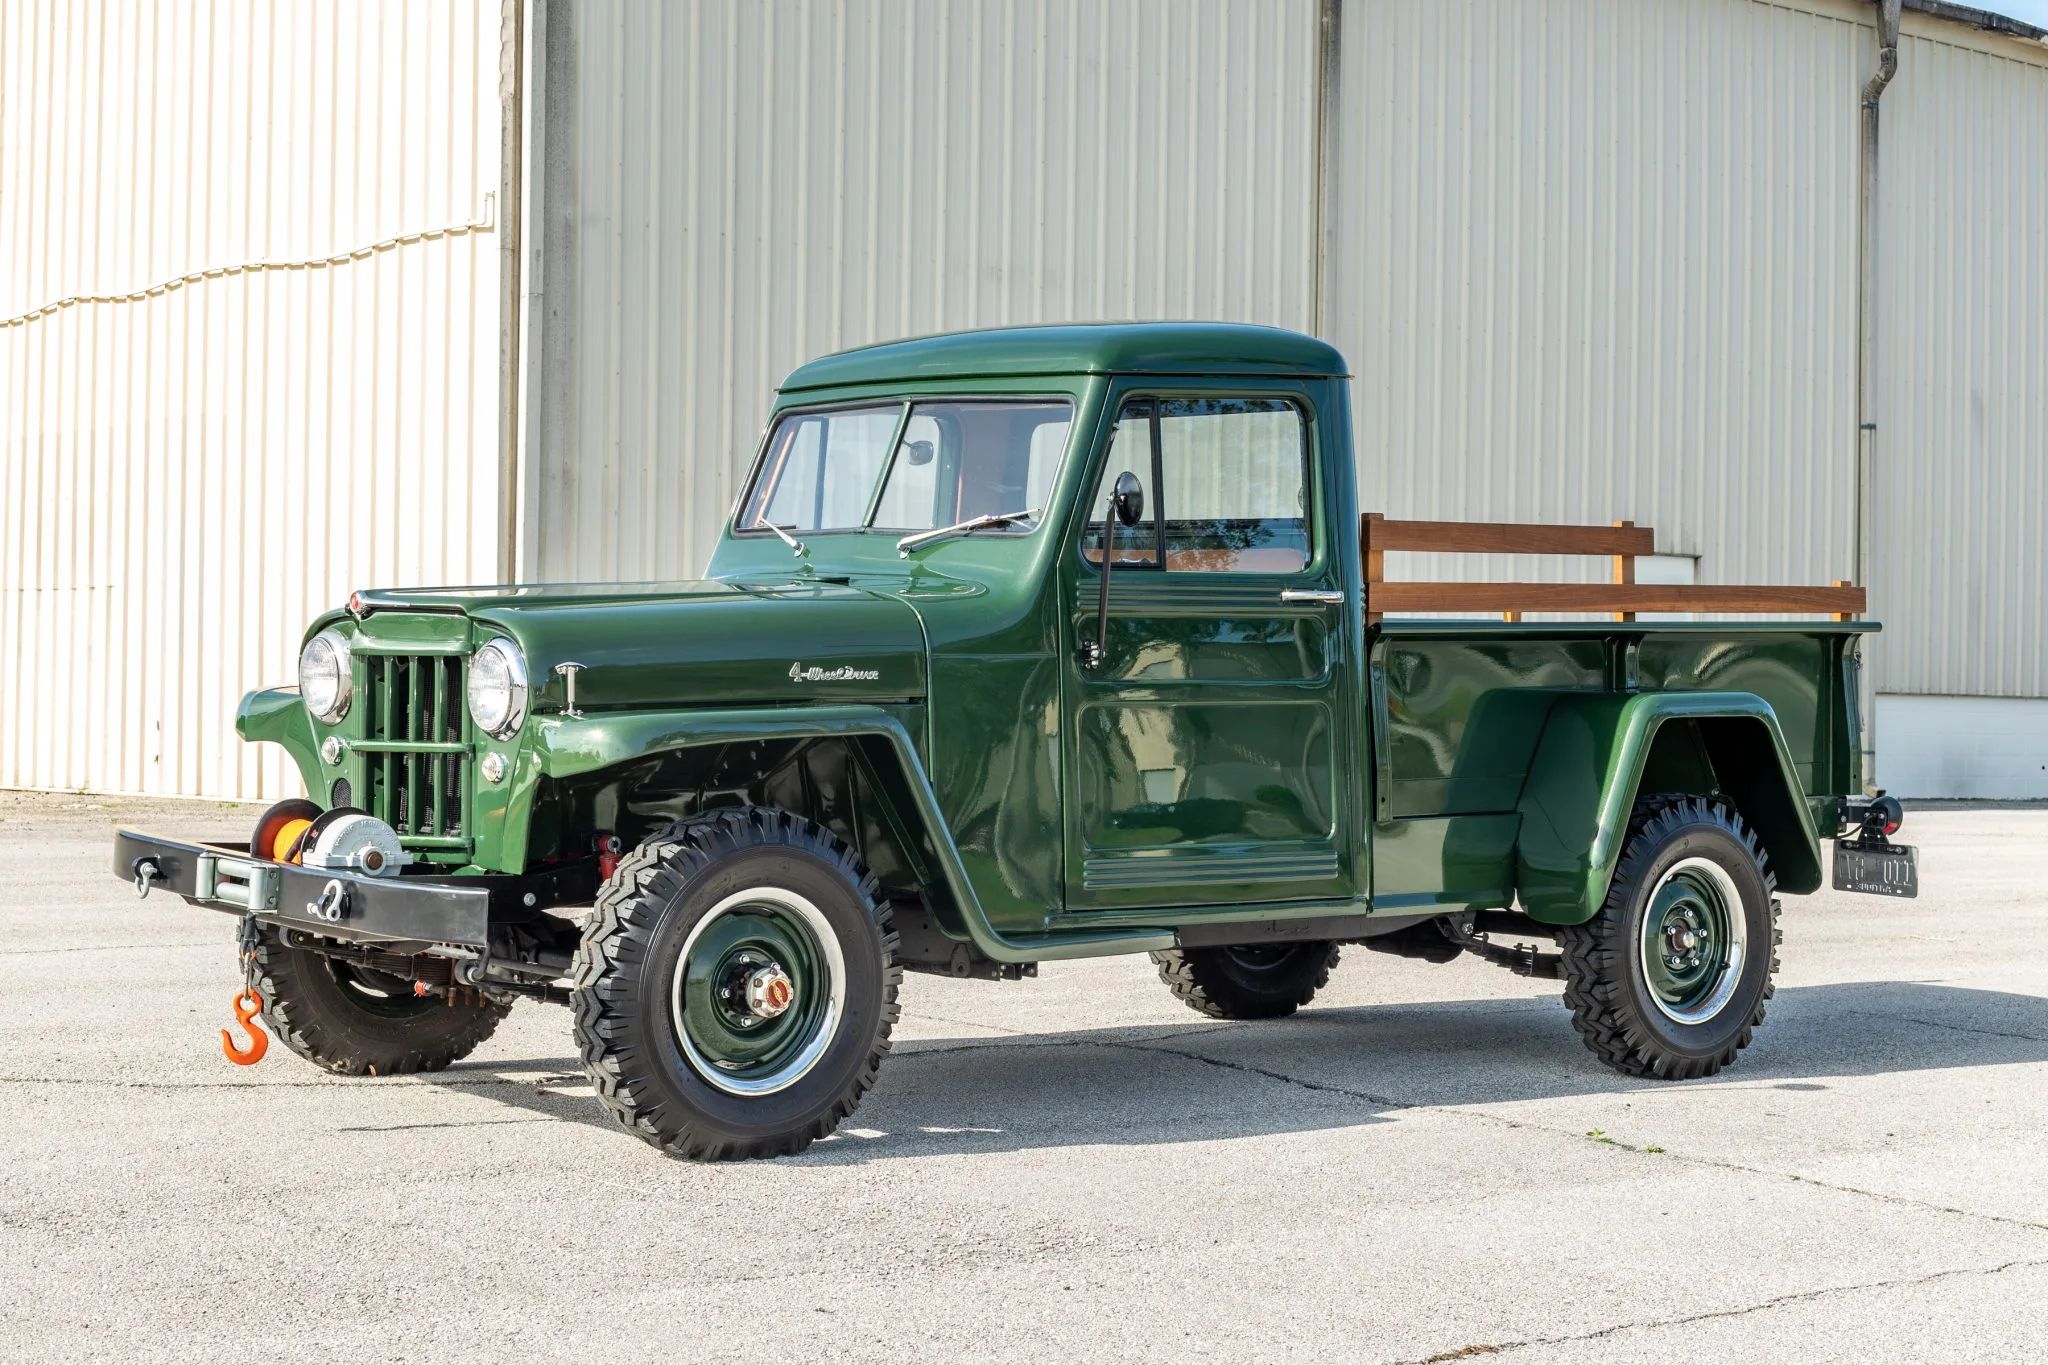 1957 Willys Jeep Truck Looks Excellent After Body-Off Refurbishment -  autoevolution